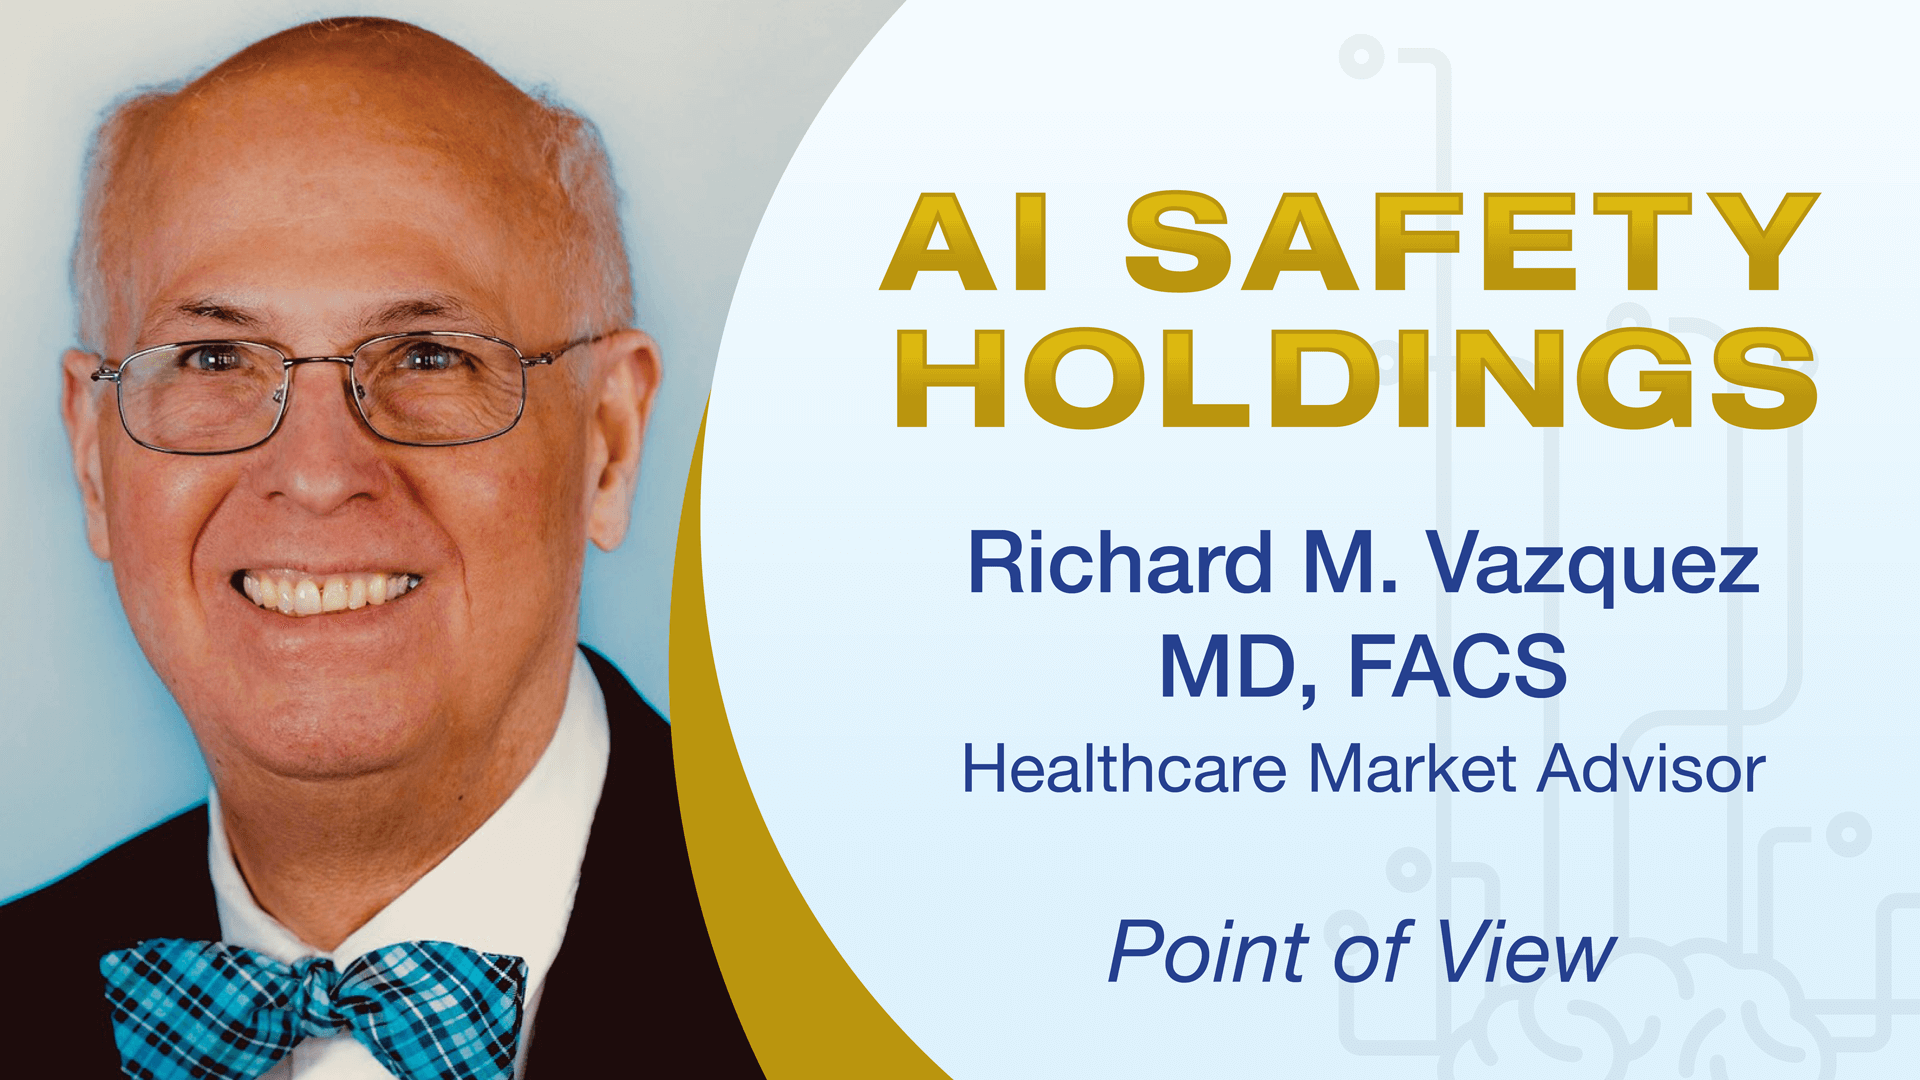 Why I Joined AI Safety Holdings, from a MD’s Perspective